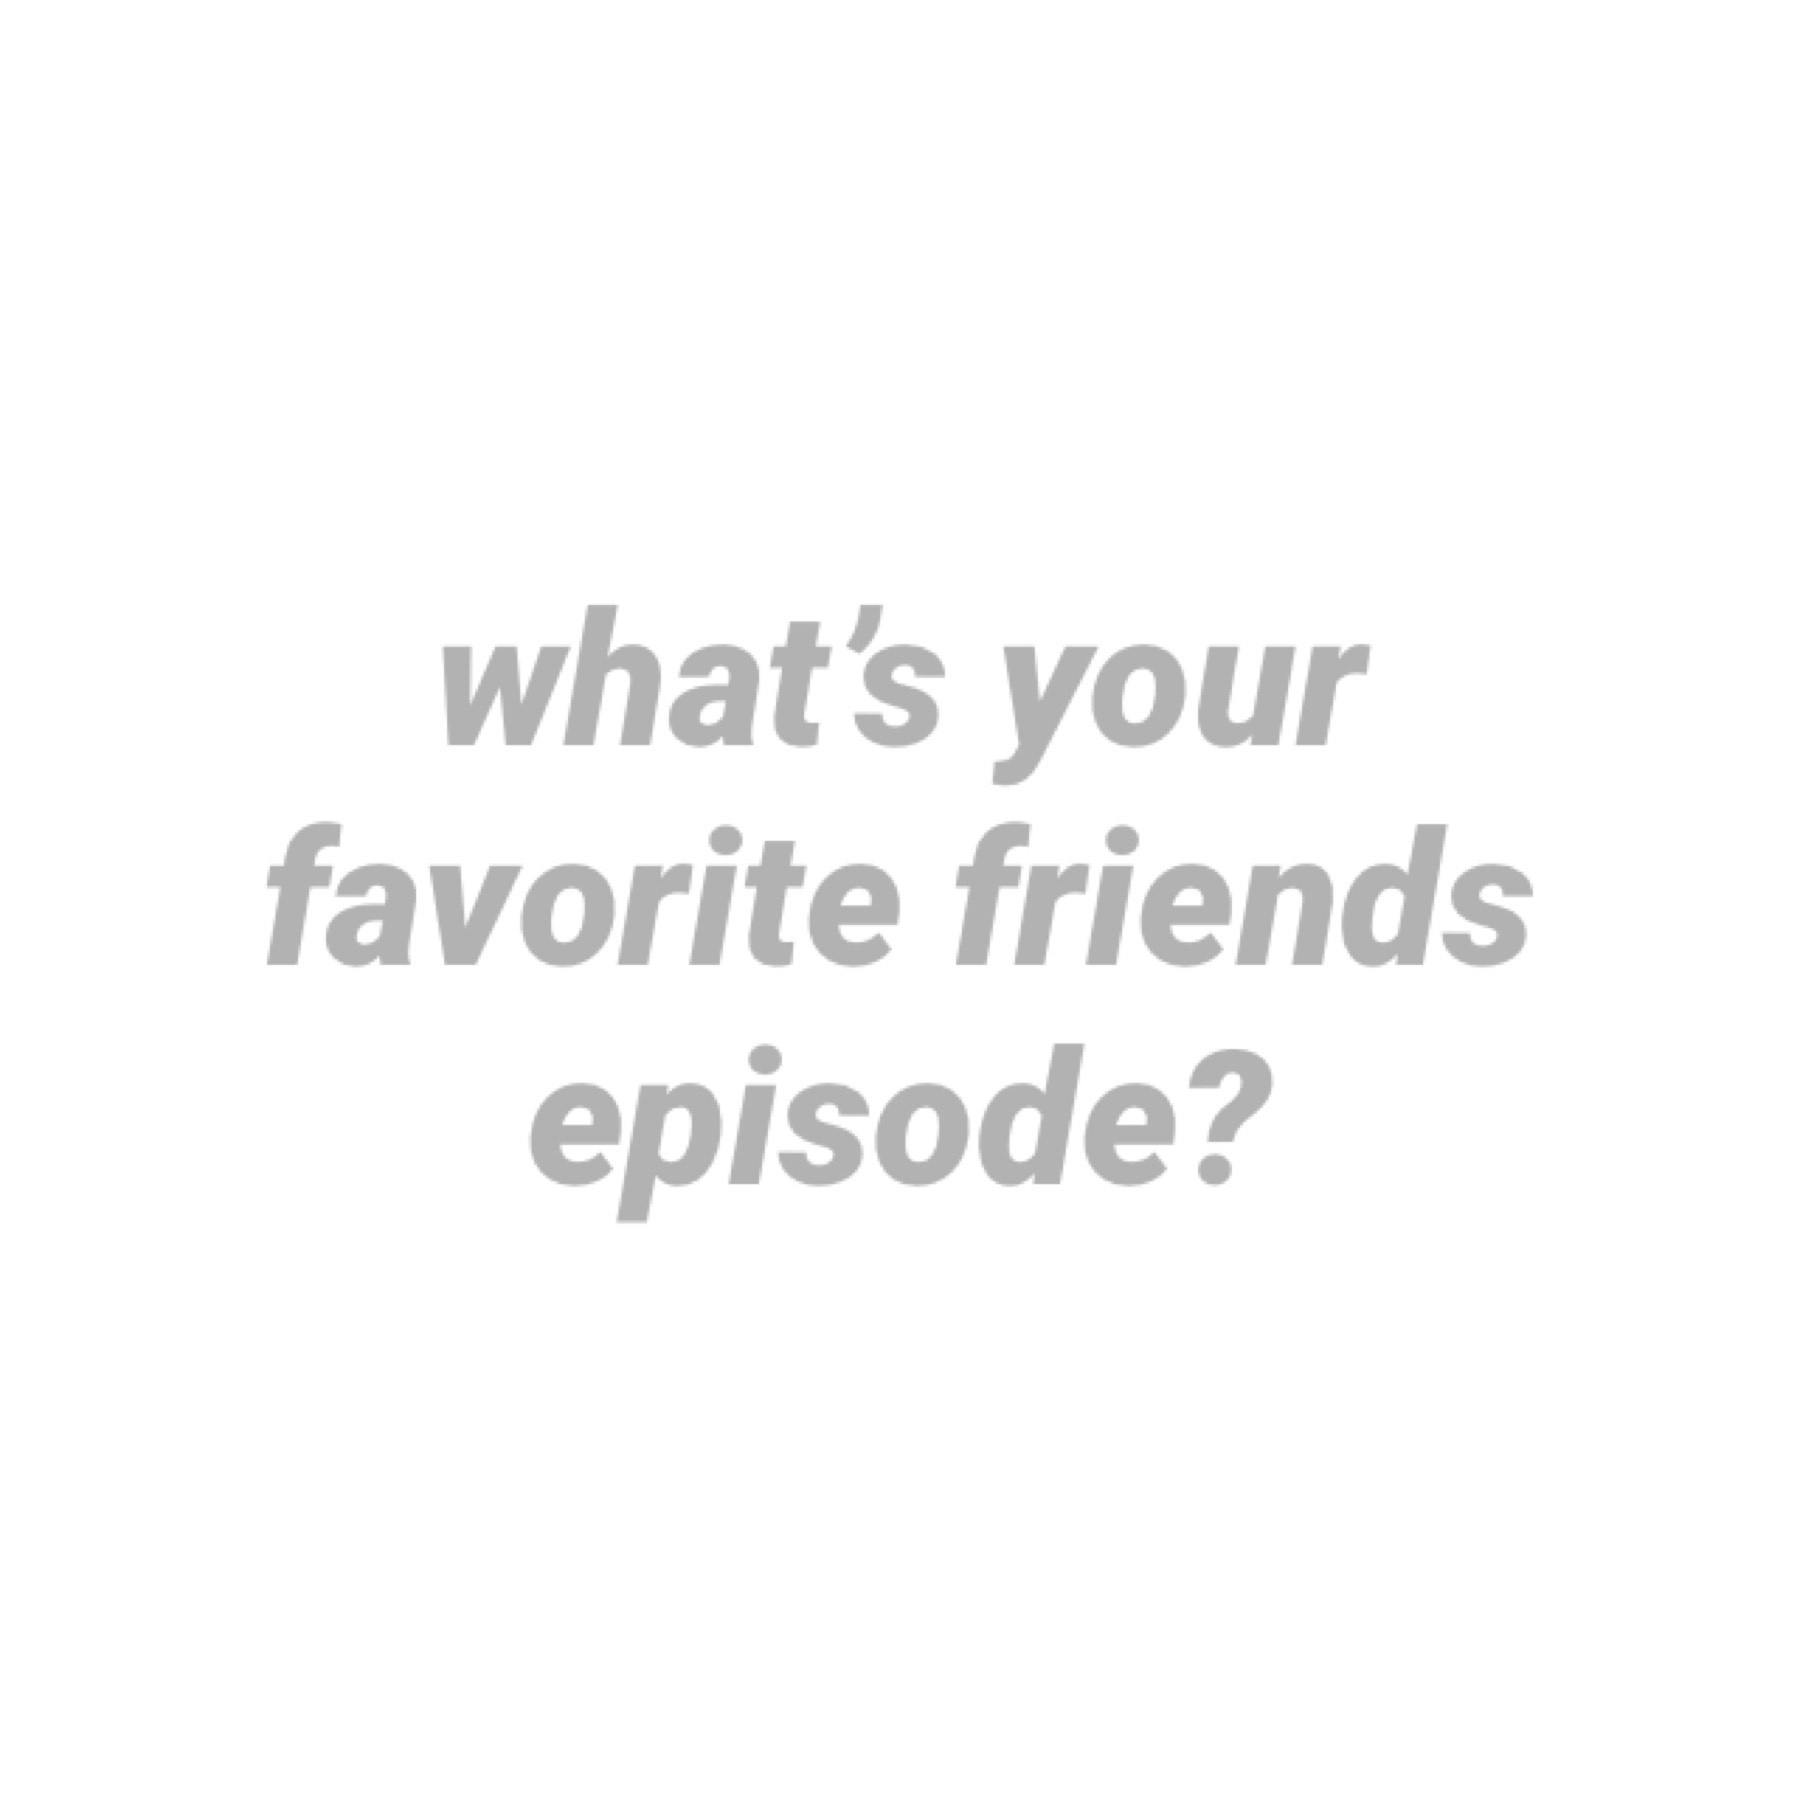 I feel like watching friends but idk which episode — maybe I’ll watch the thanksgiving ones I want something cozy ☕️